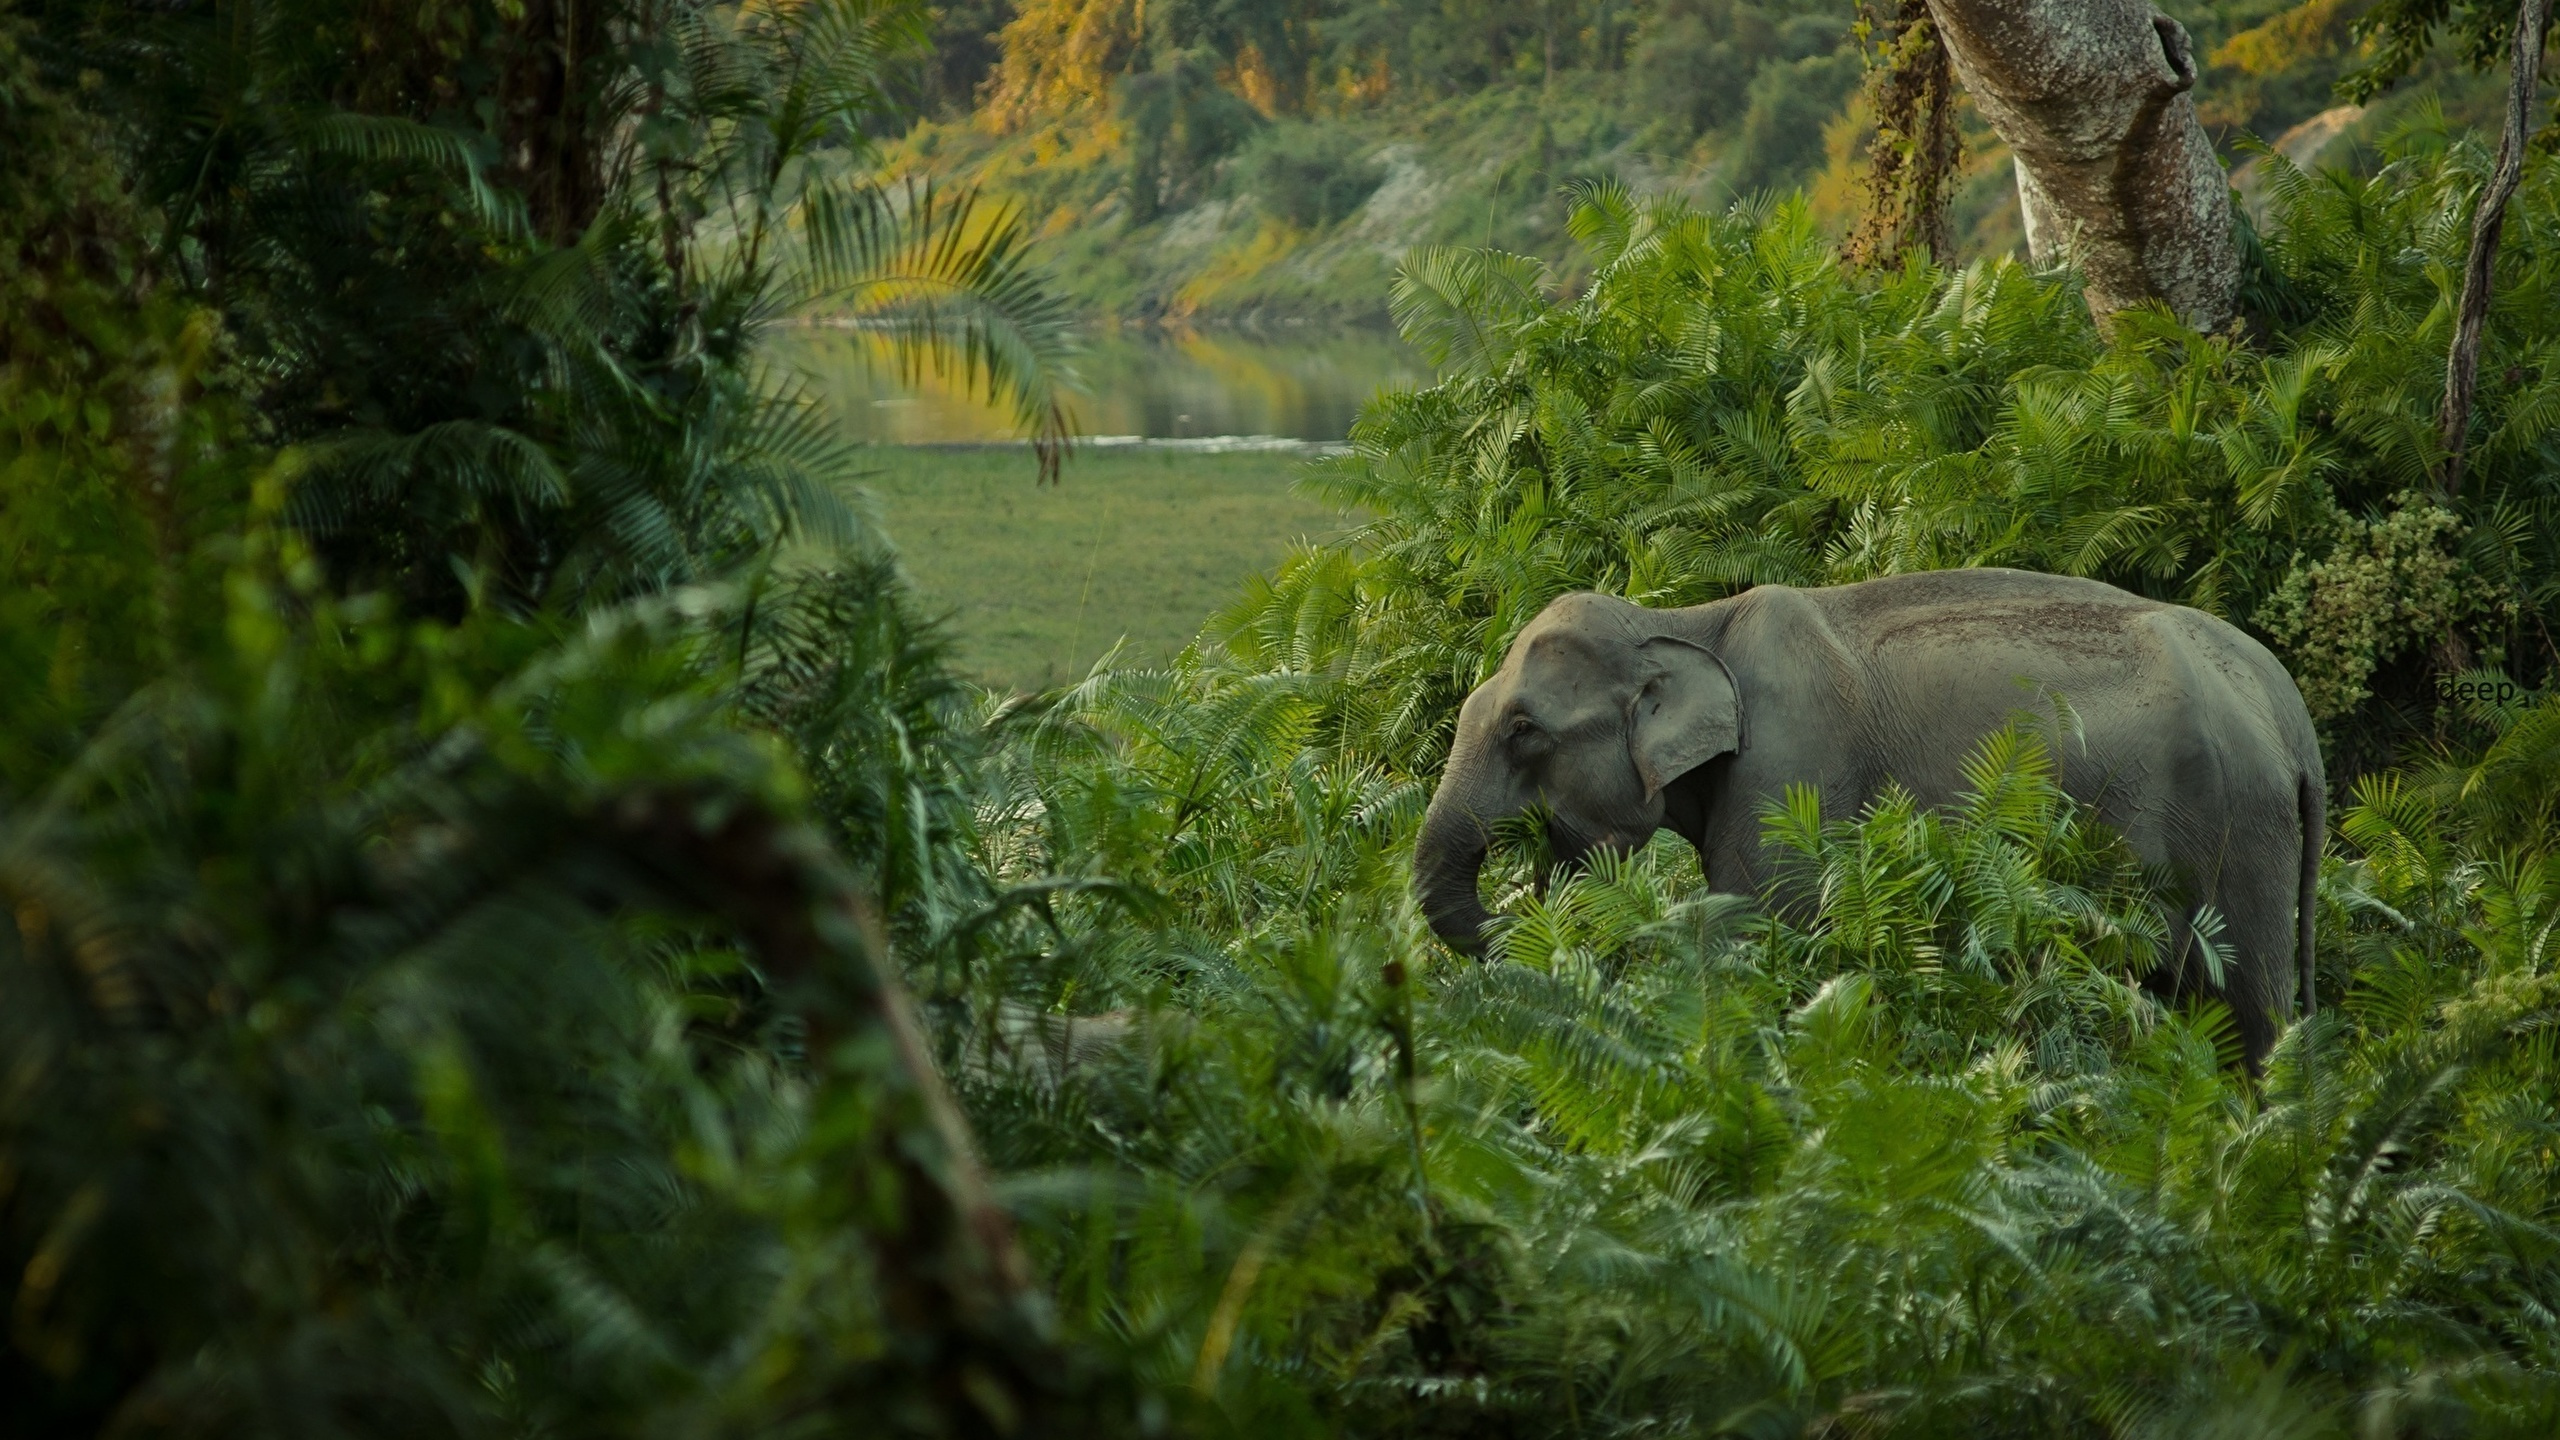 Elephant Eating Grass During Daytime. Wallpaper in 2560x1440 Resolution